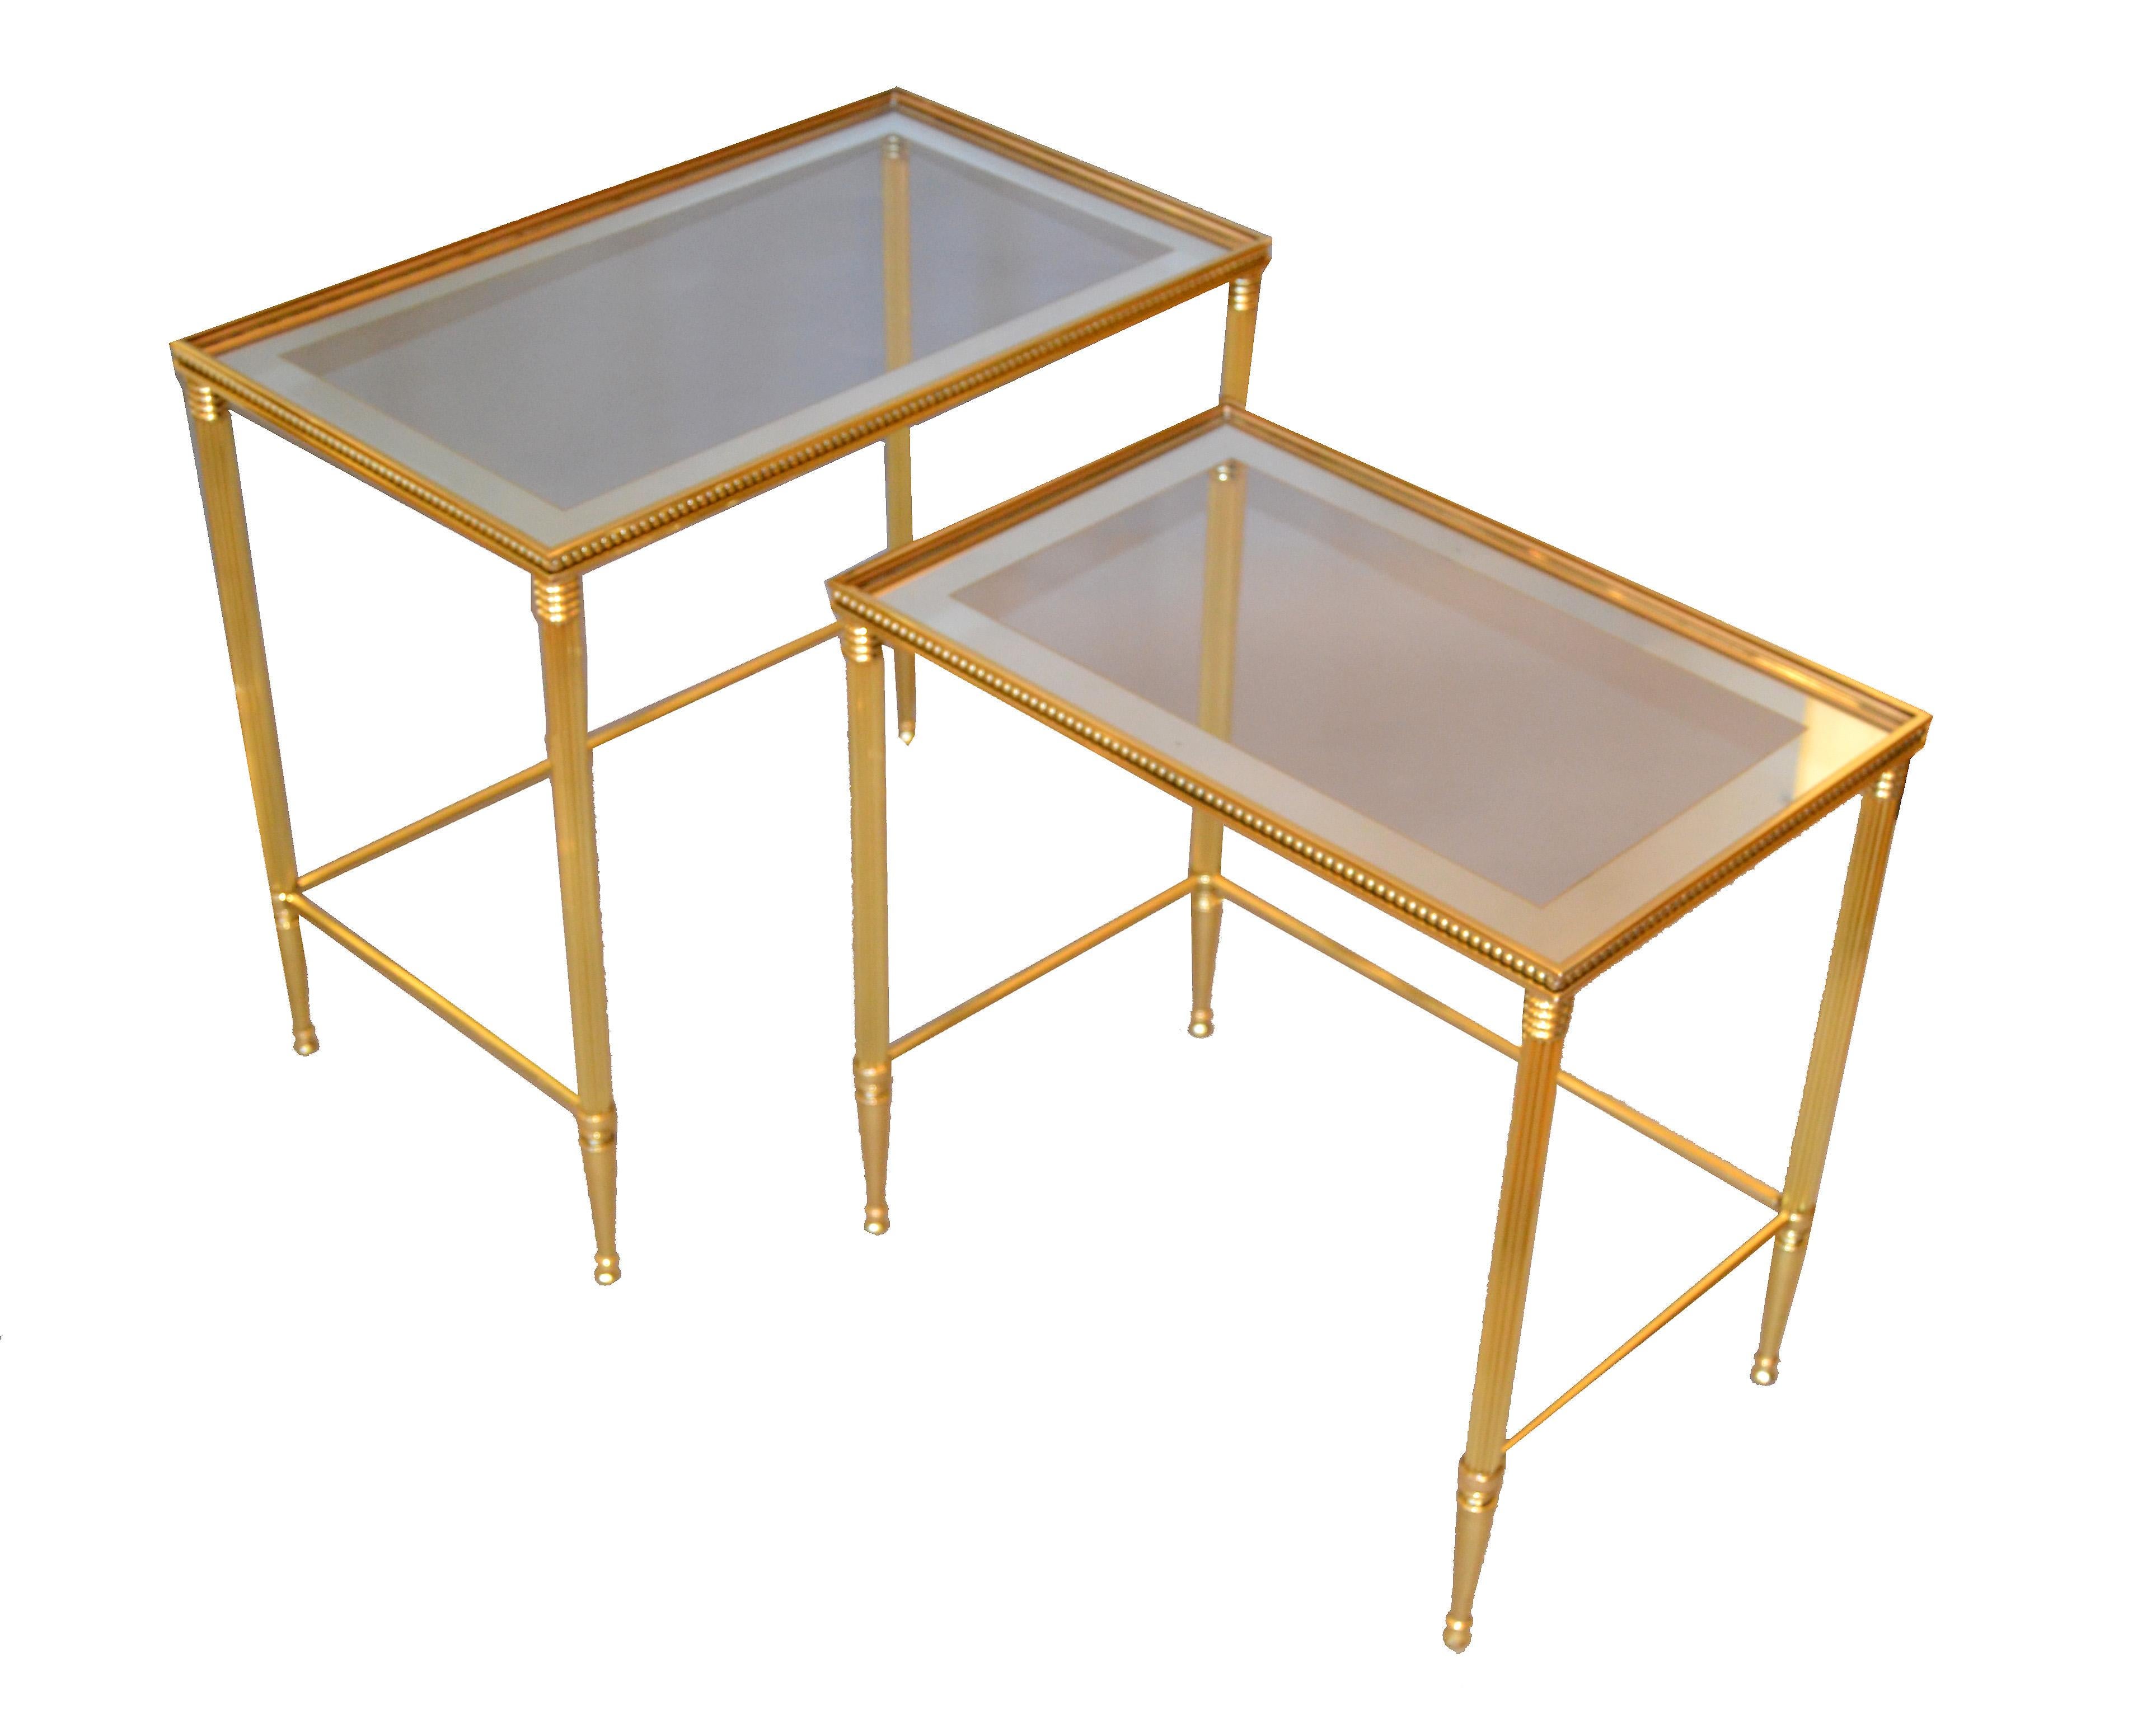 Two of Maison Jansen brass nesting tables with mirrored edge glass tops.

Size of each table:
23.25